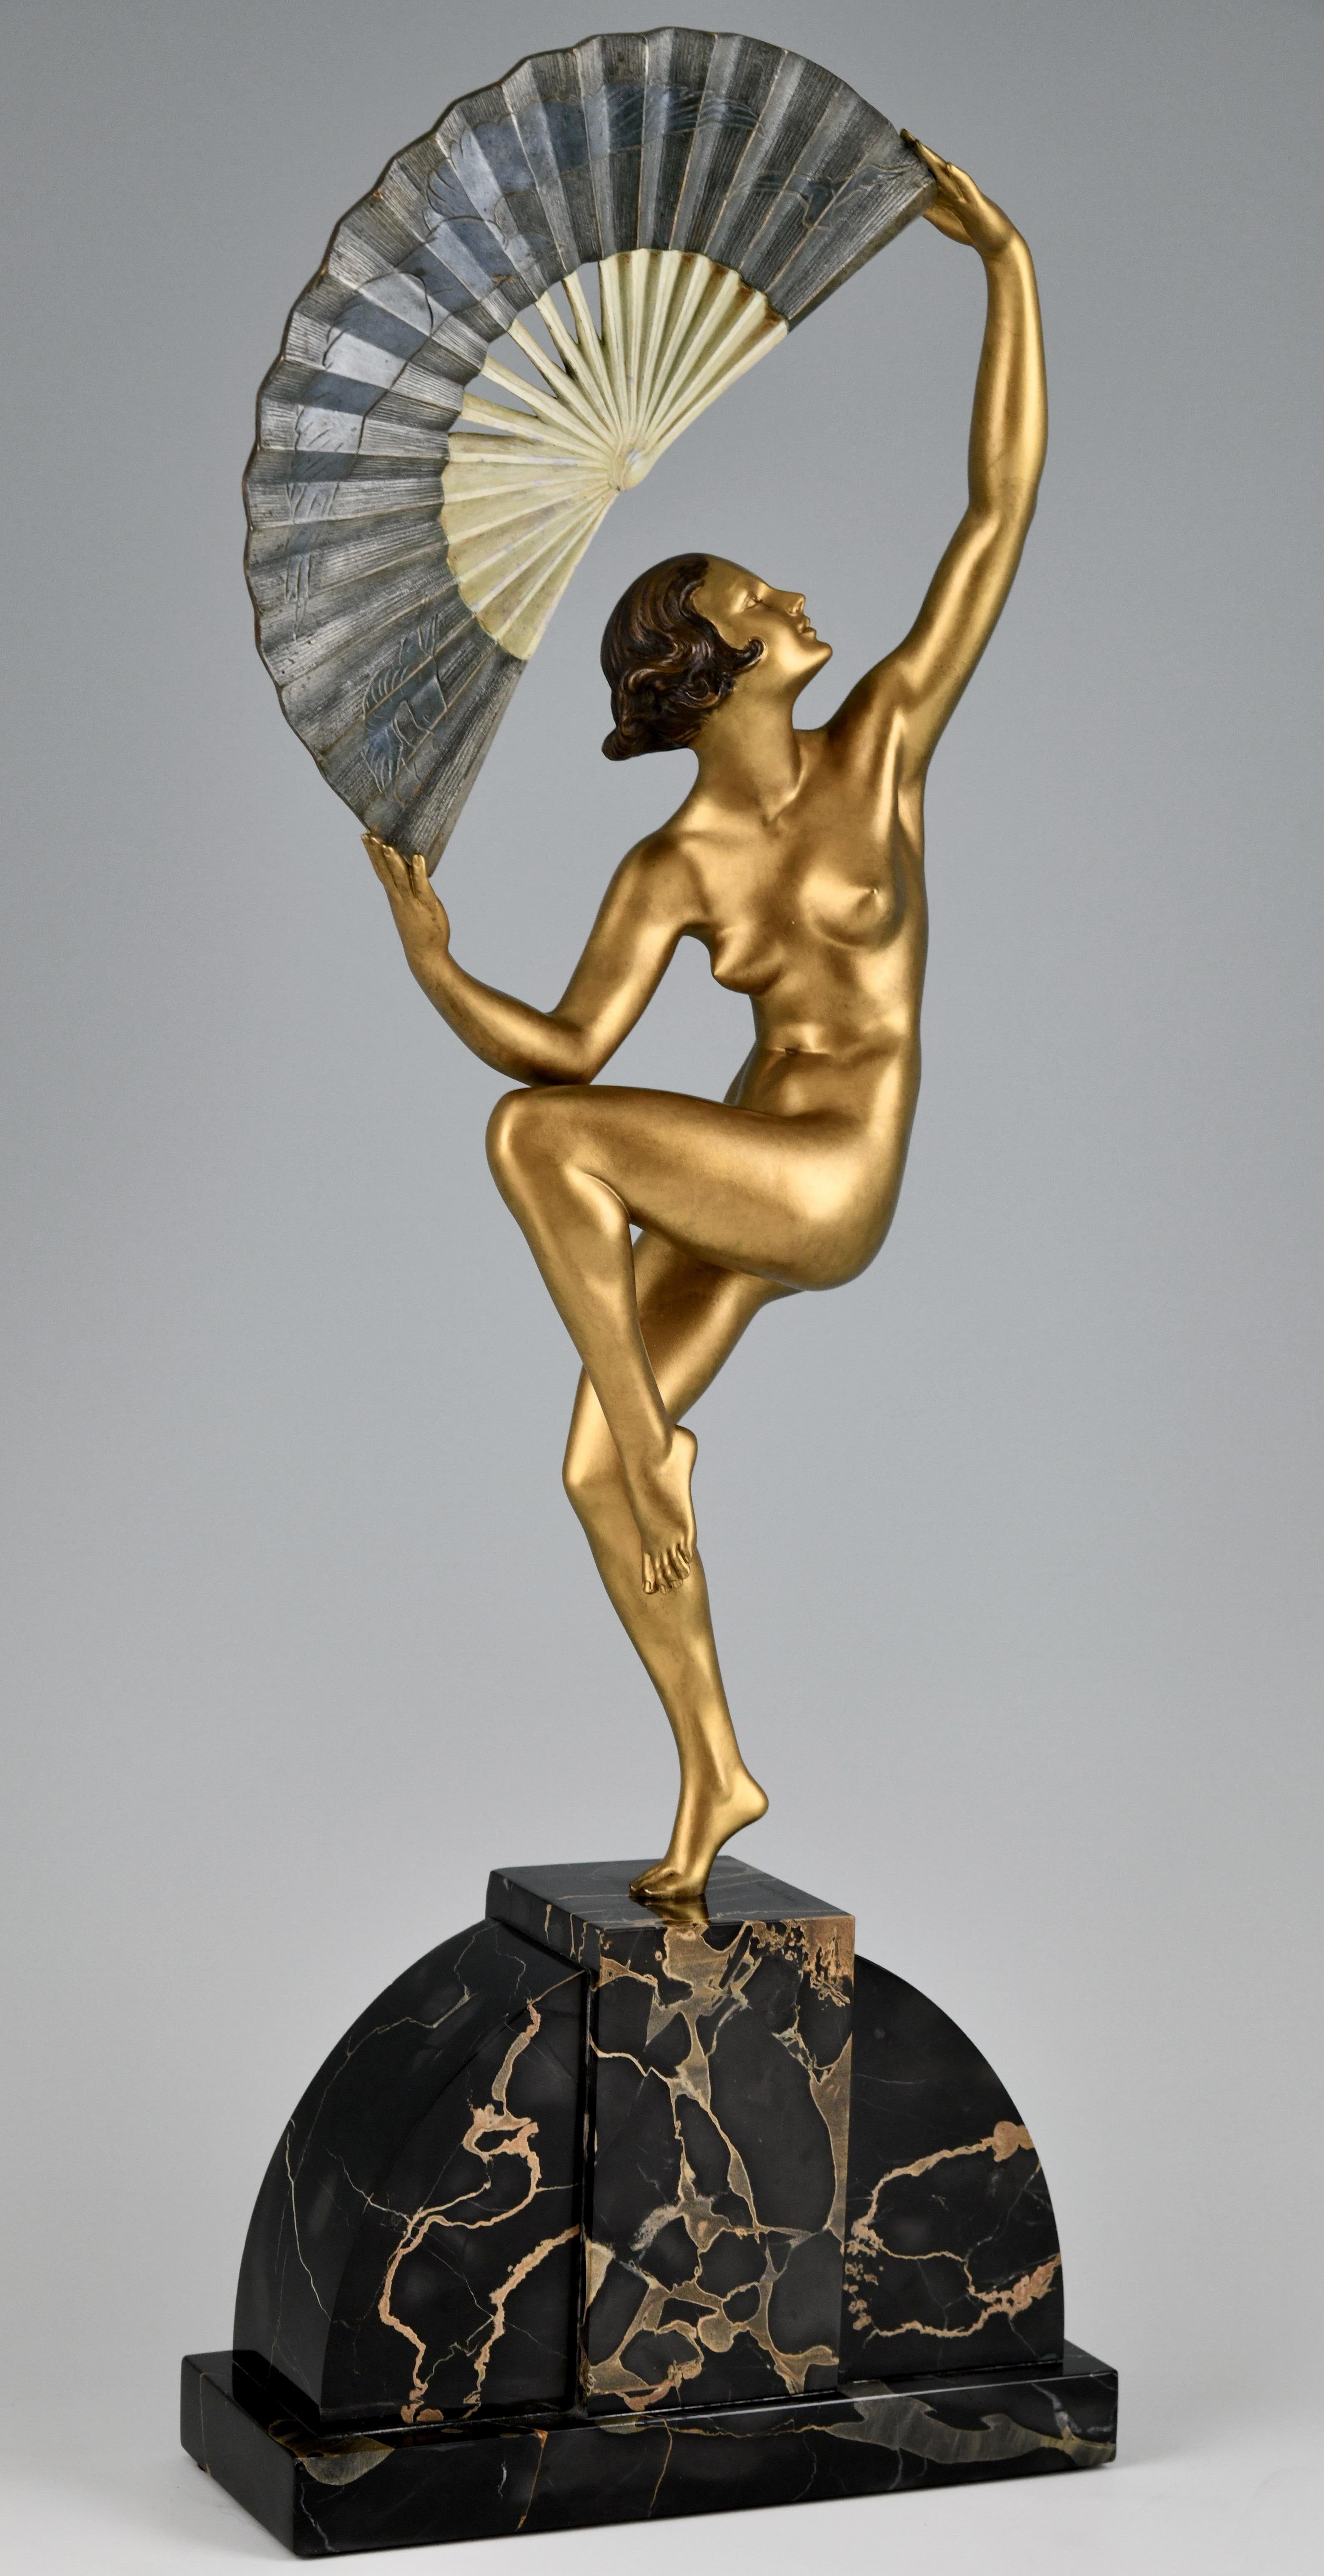 Art Deco bronze sculpture nude fan dancer.
Sculpture in patinated bronze of a dancing nude standing on one foot holding a fan incised with a design of birds.
The bronze is signed by Marcel André Bouraine, with Etling Paris Founders' signature, on a